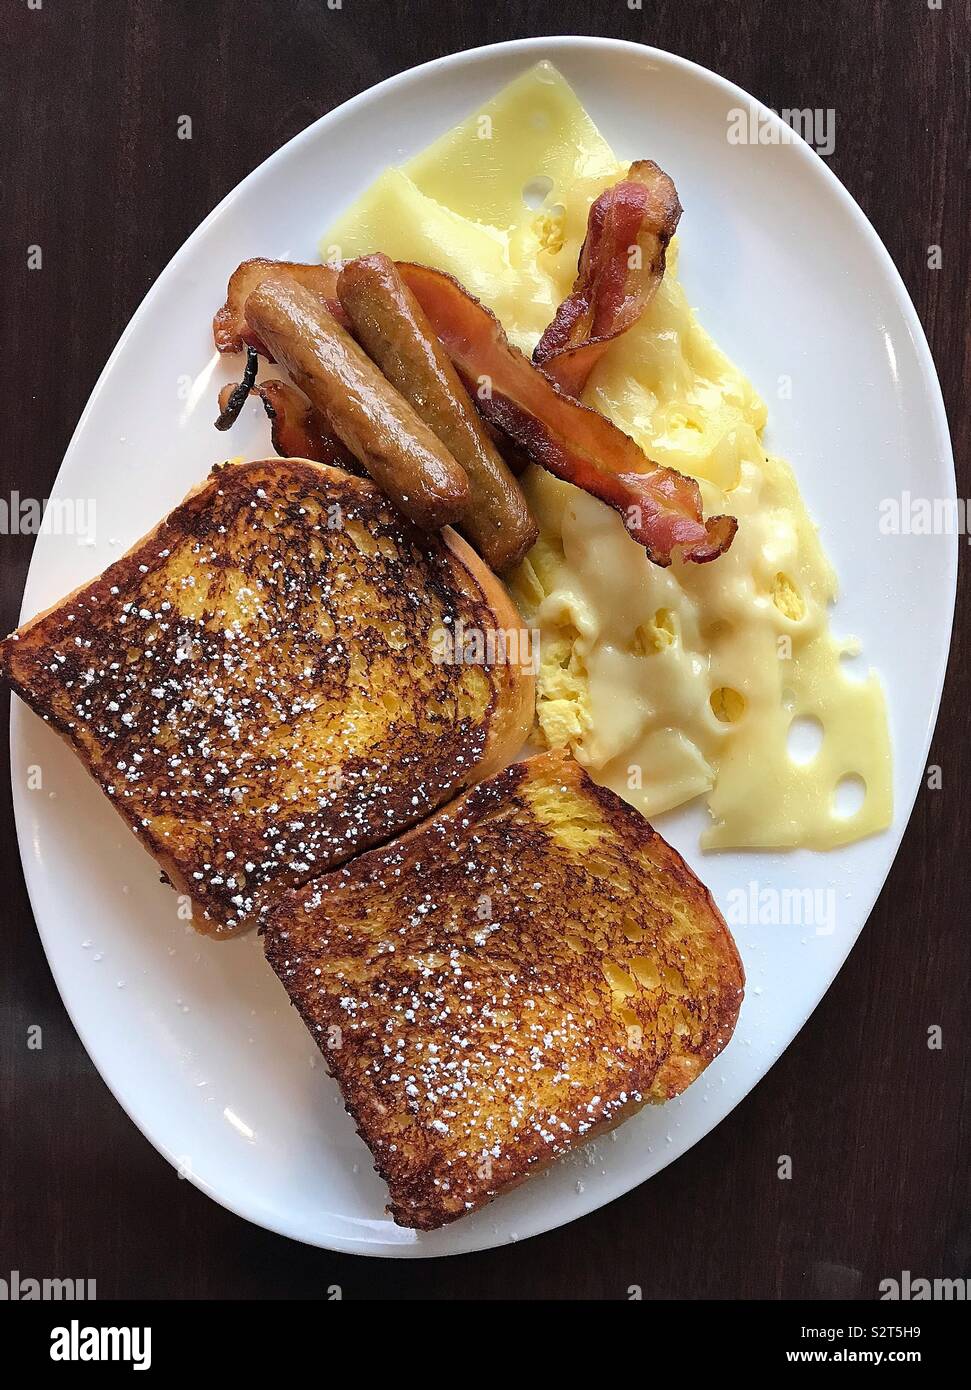 A mouth-watering meal of fluffy French toast, crispy bacon, sausages, and a Swiss cheese omelette sits on a large white oval plate. The bright meal sits on a dark brown table. Stock Photo